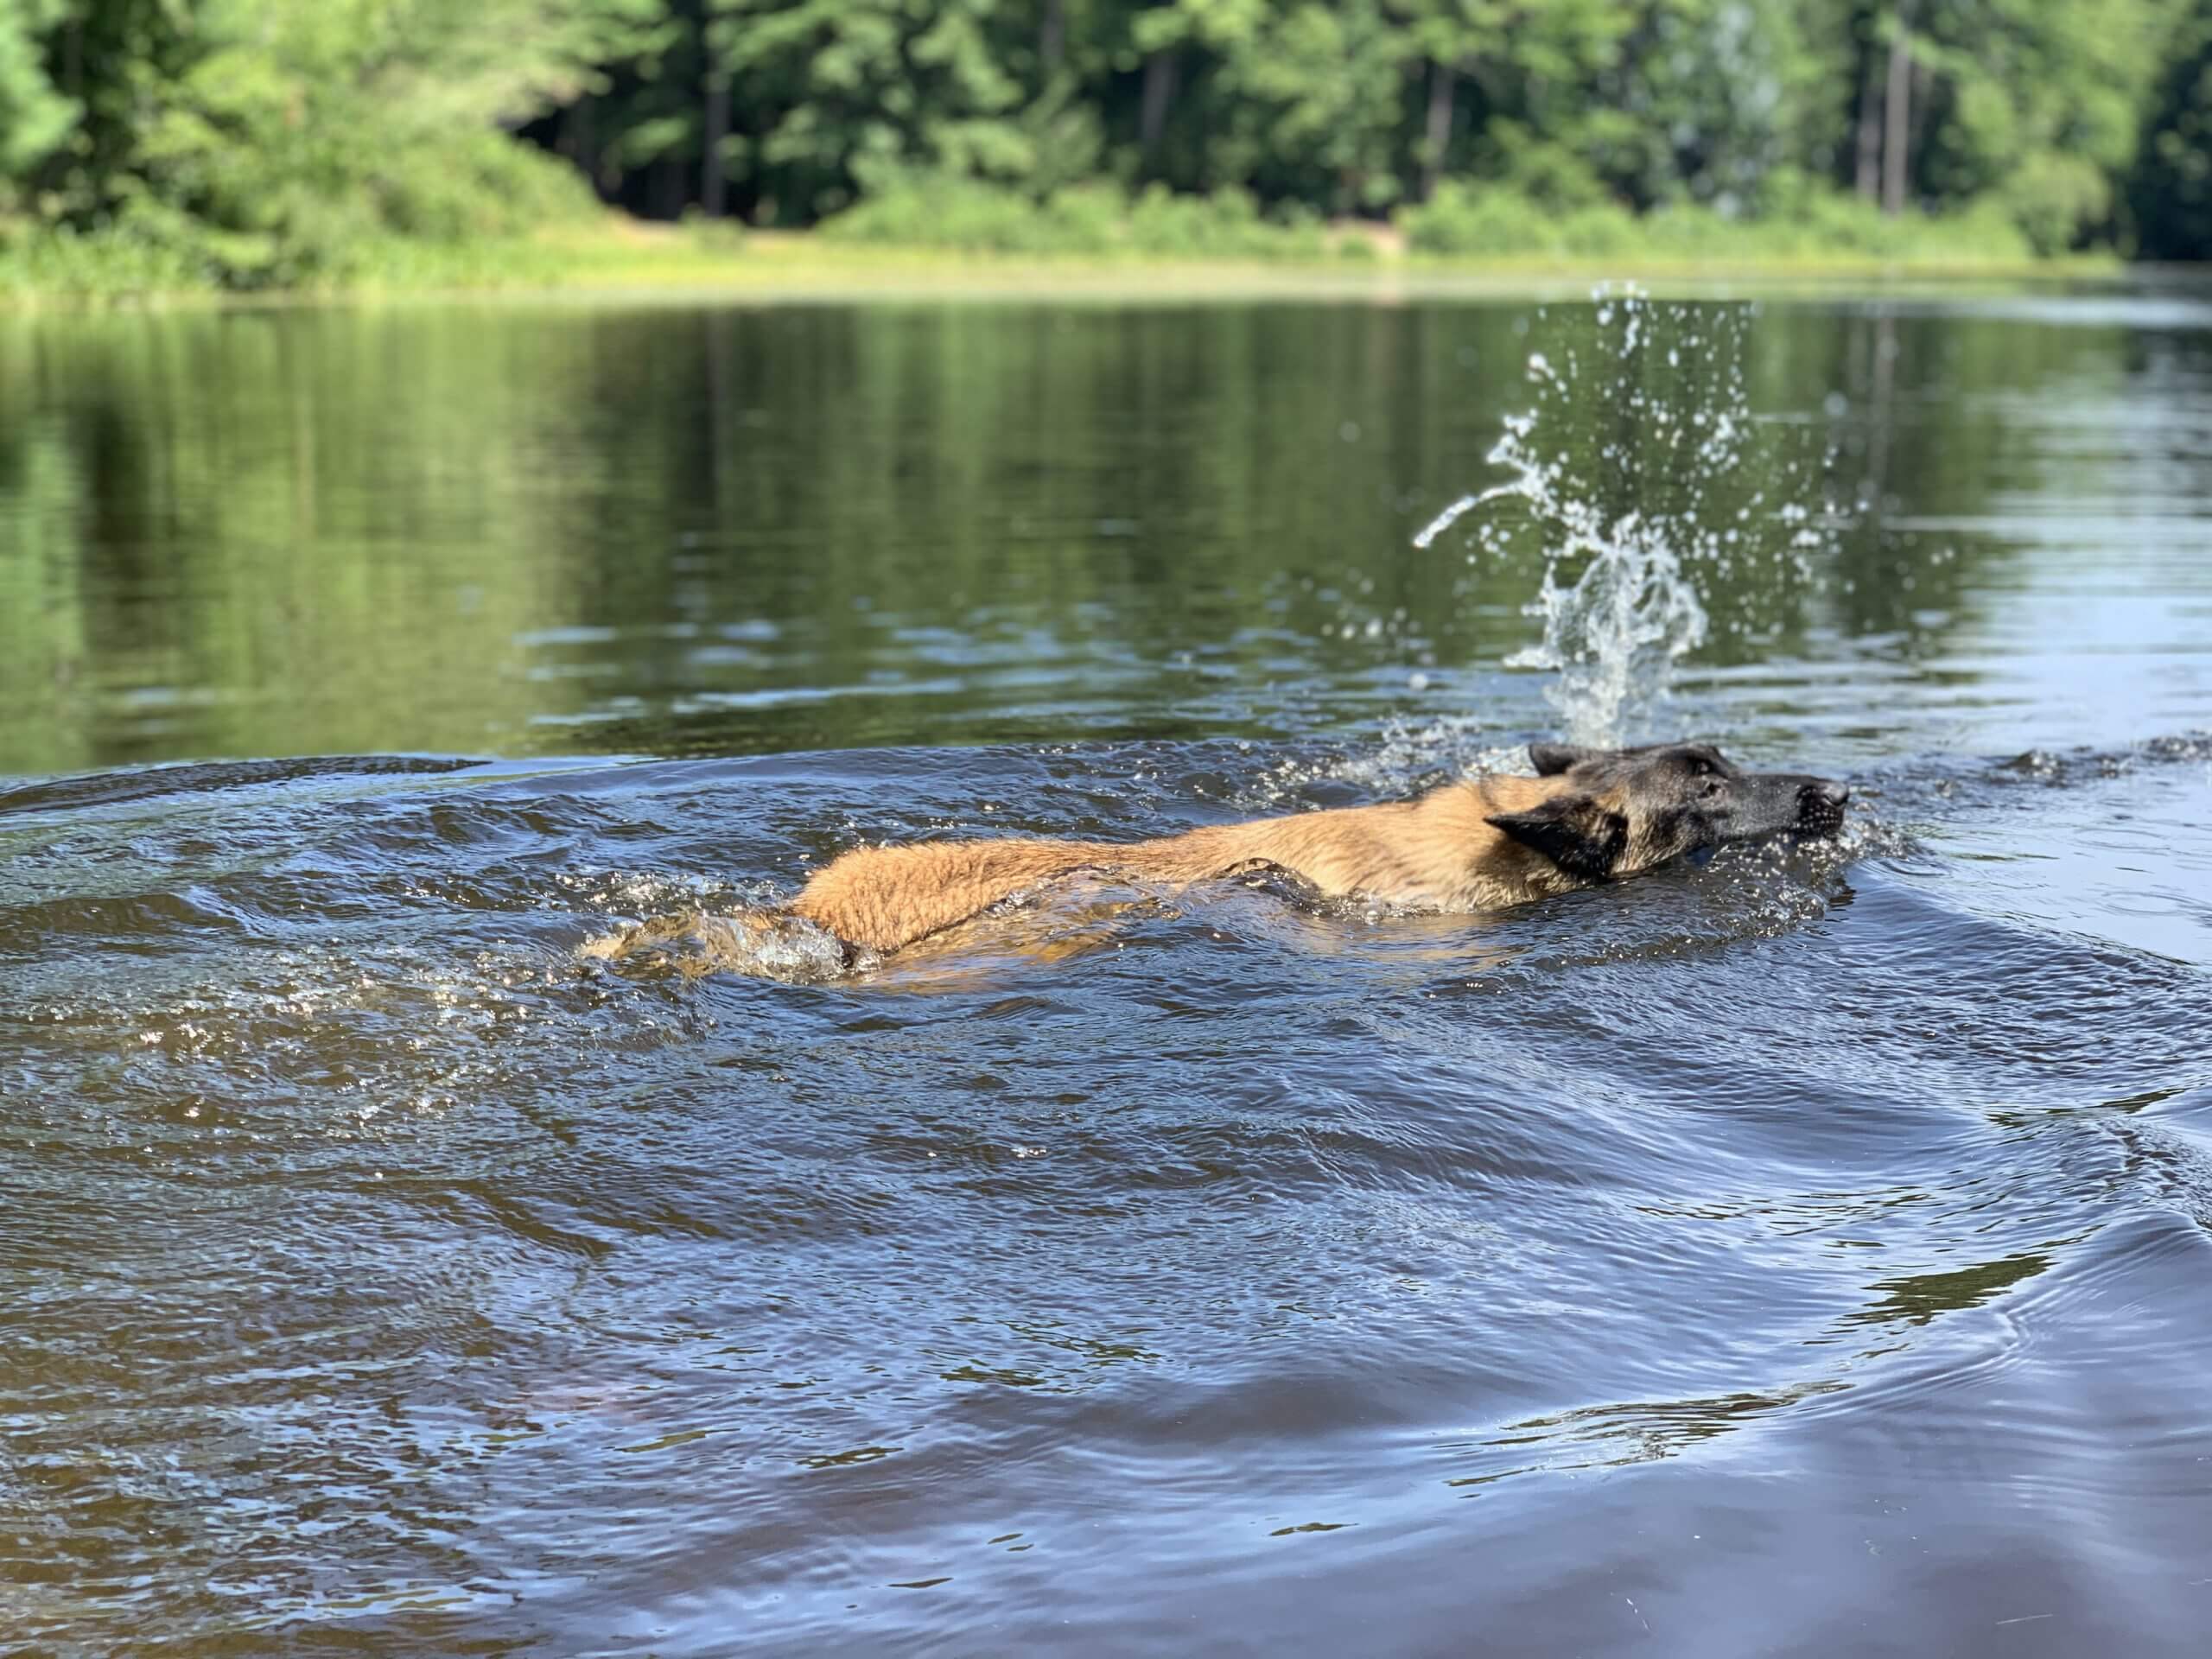 Protection dog swimming in a lake